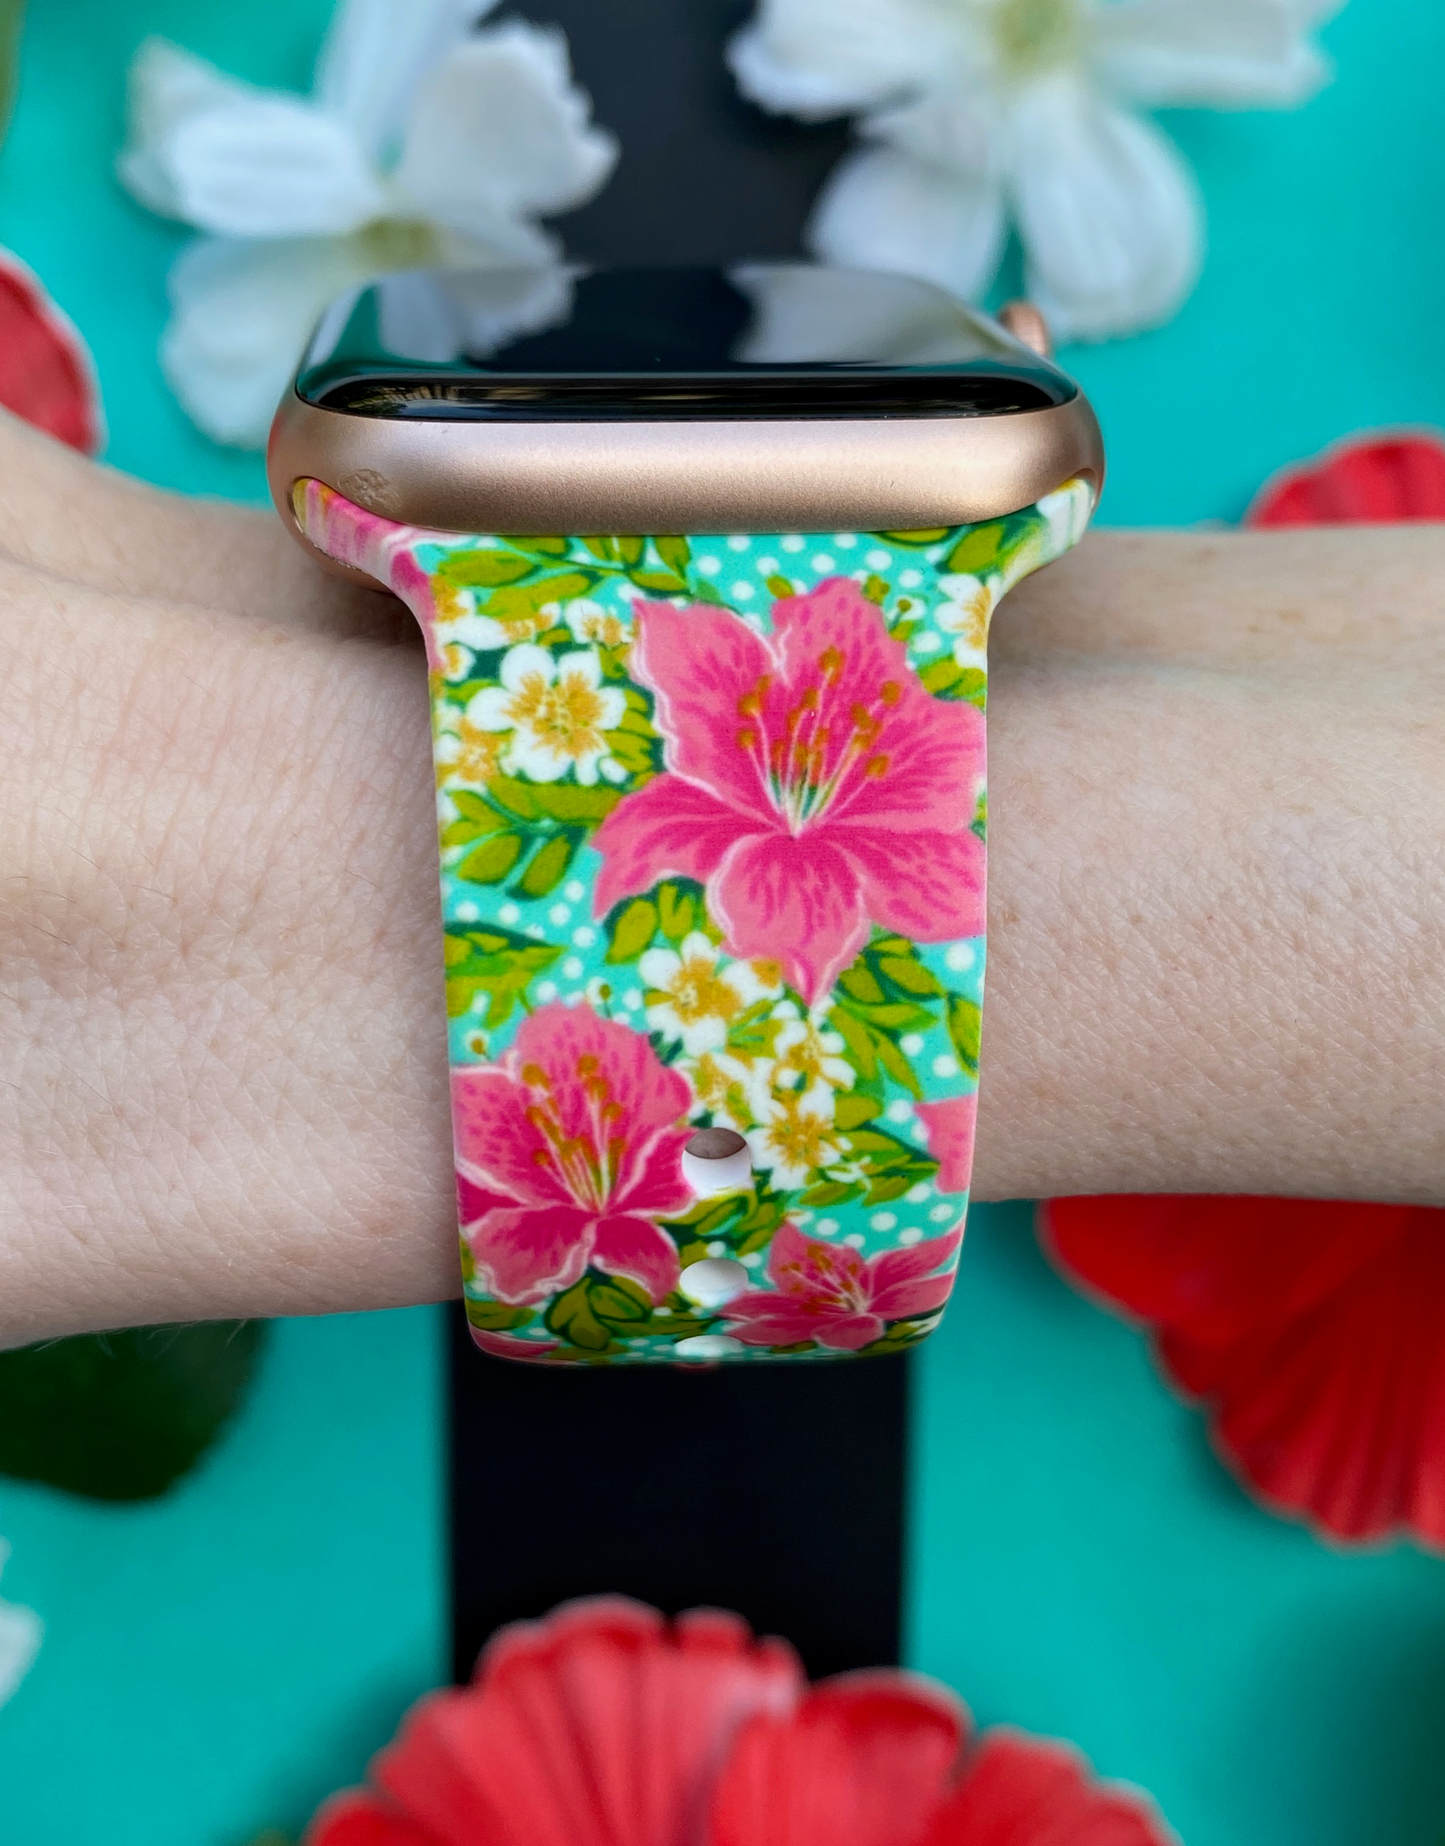 Flower Blooms Apple Watch Band